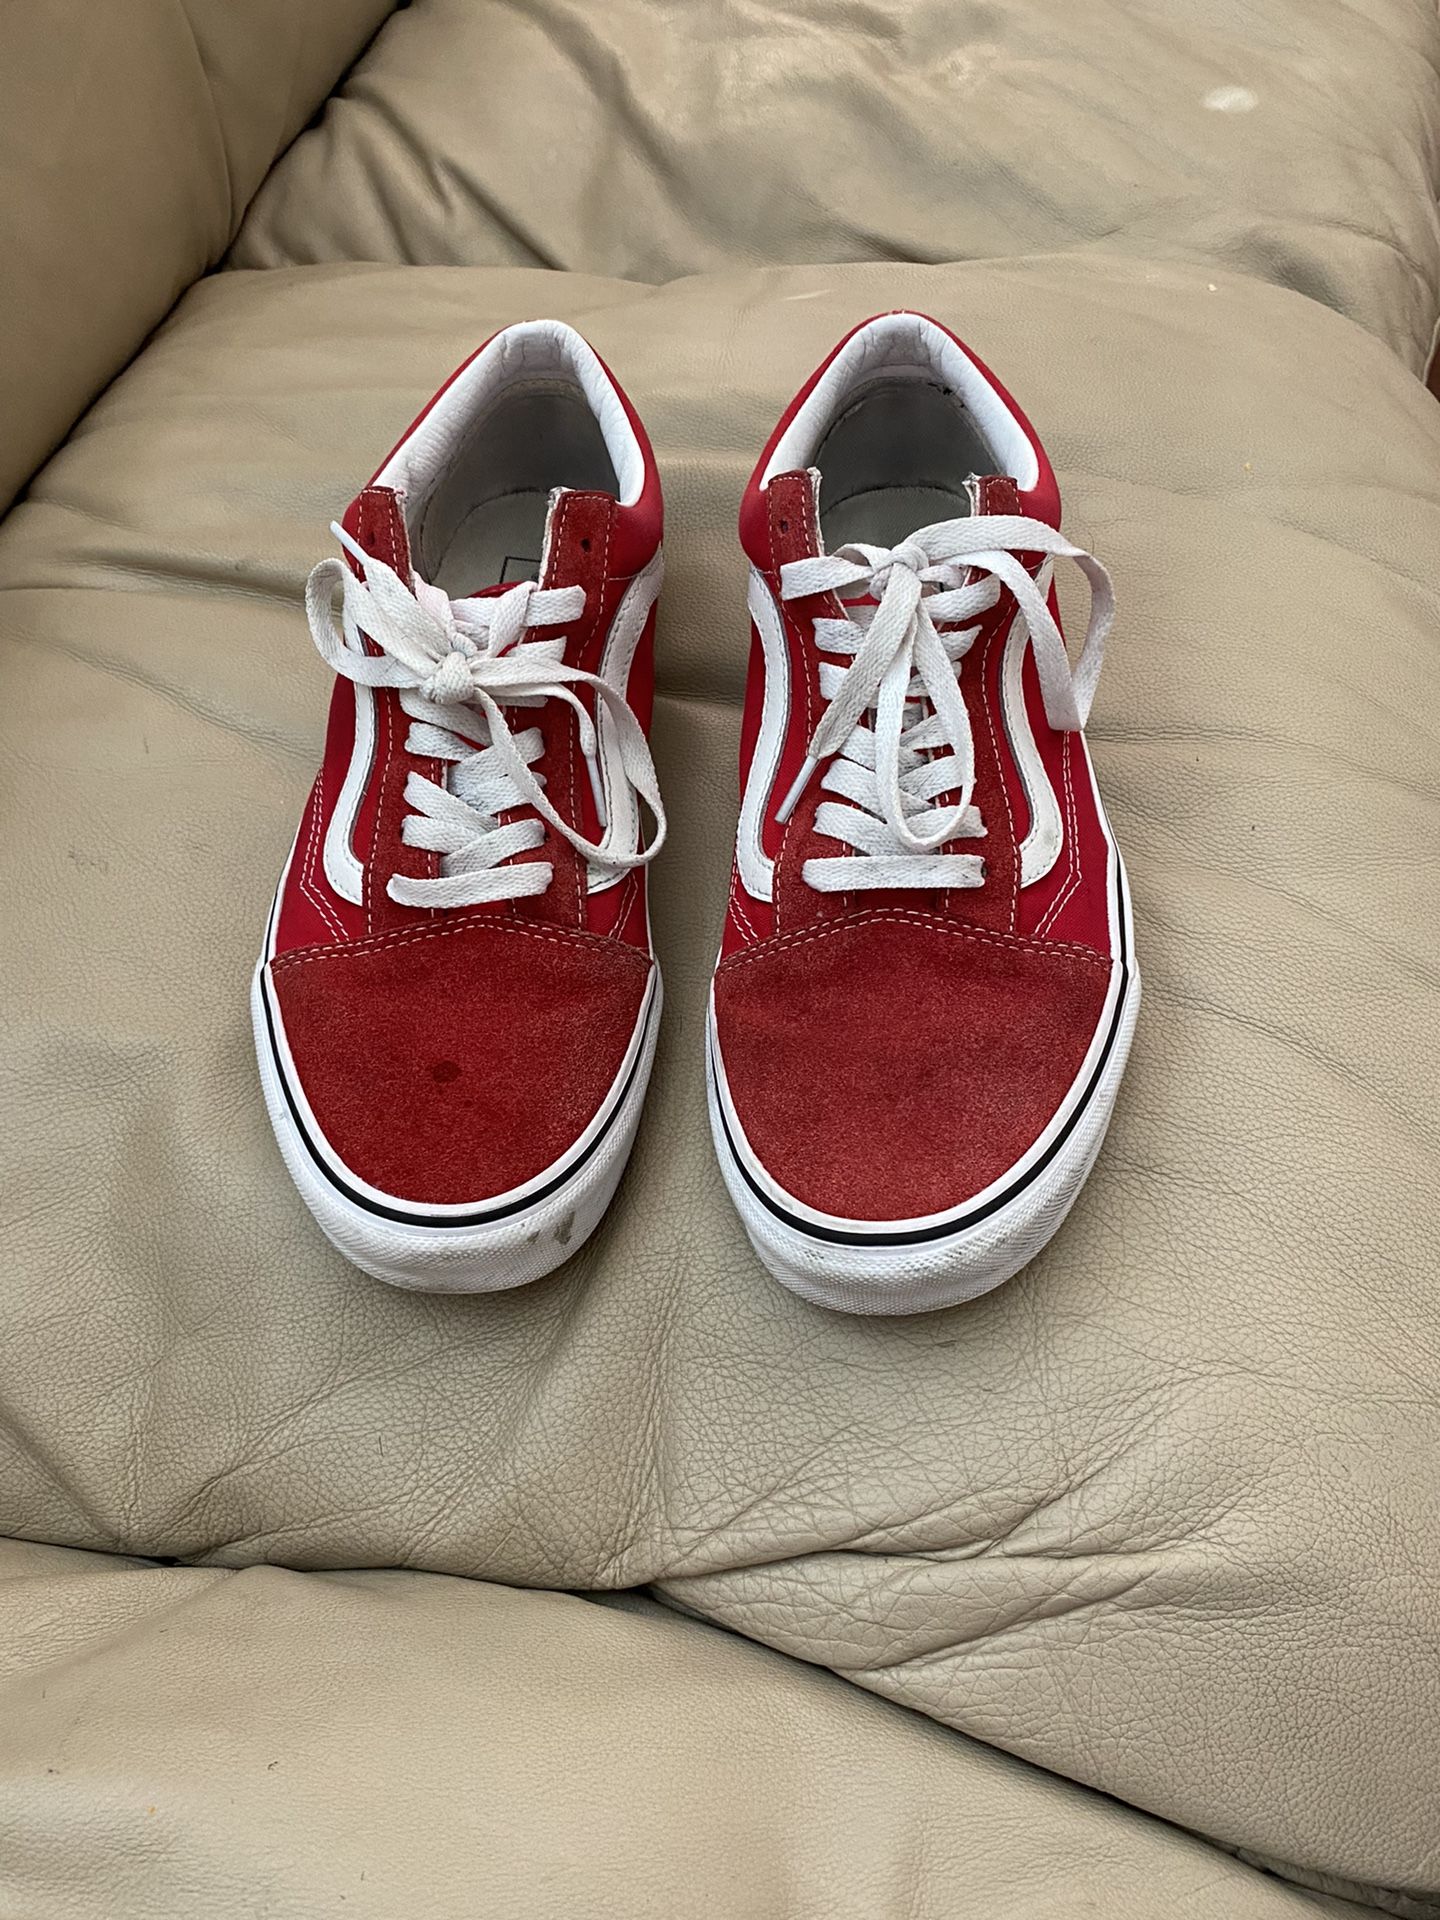 Vans Red Mens Size 10 ! Or Best Offer Accepted